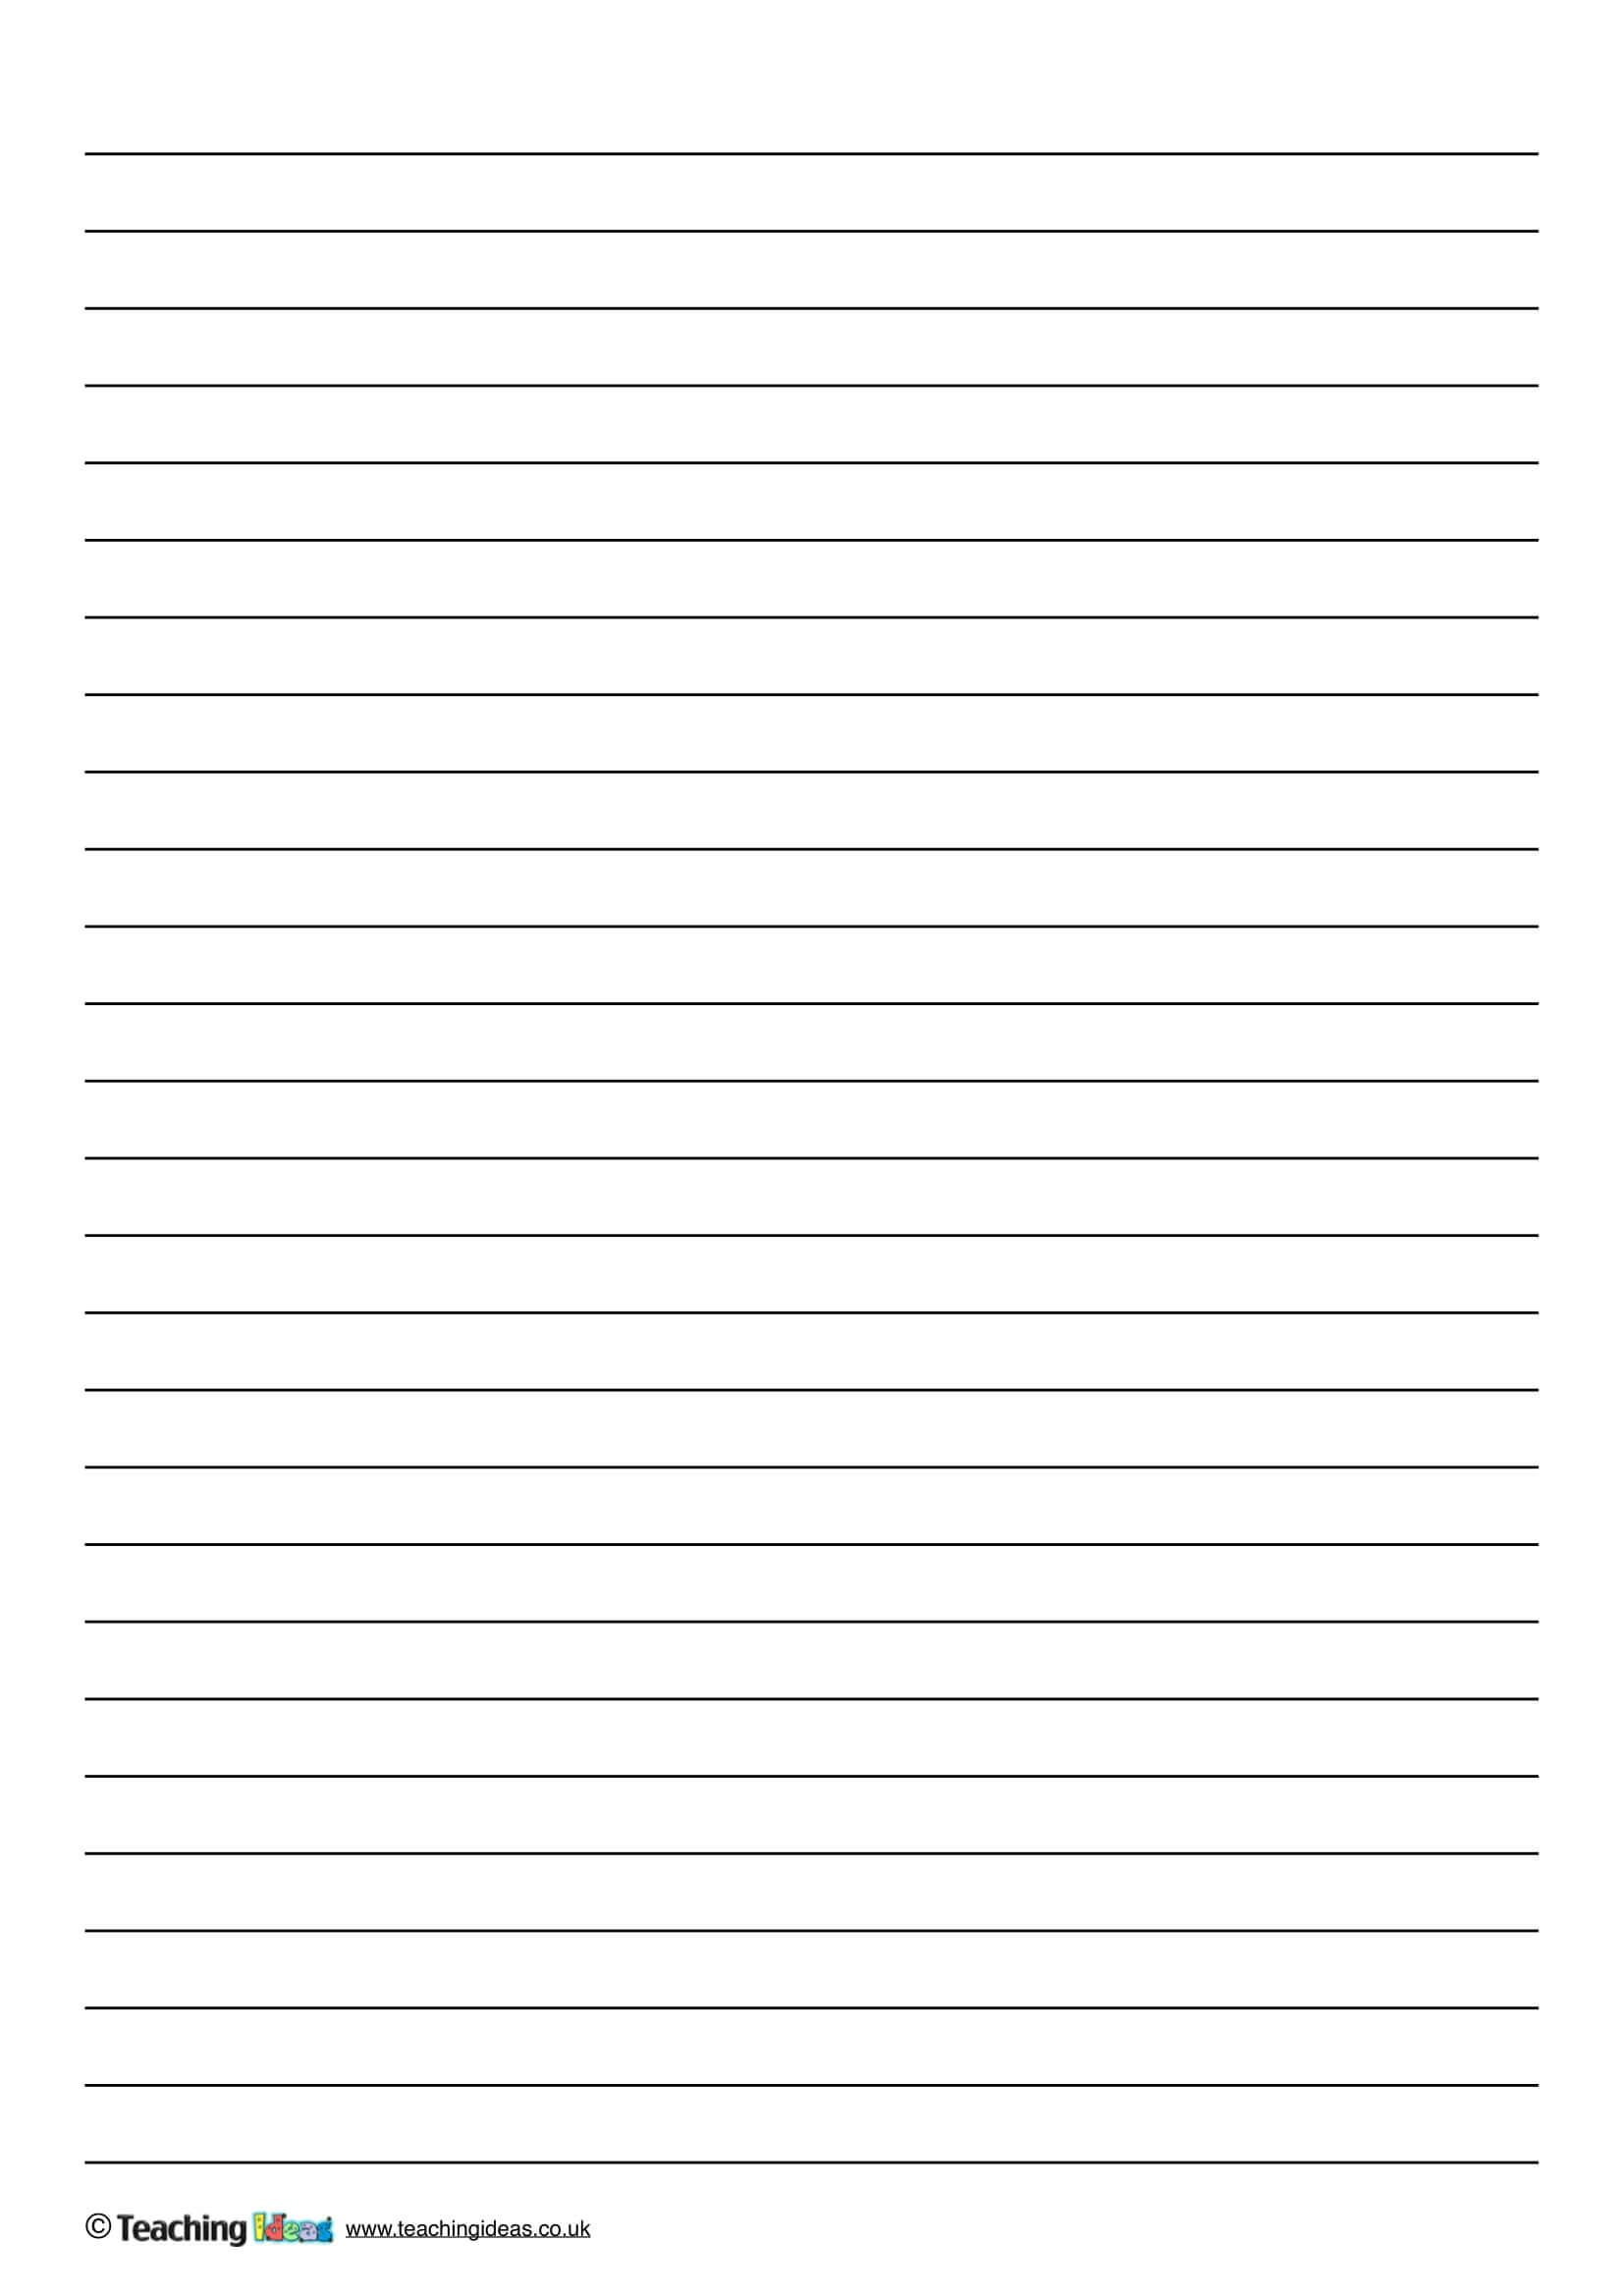 11+ Lined Paper Templates - Pdf | Free & Premium Templates Inside Ruled Paper Template Word